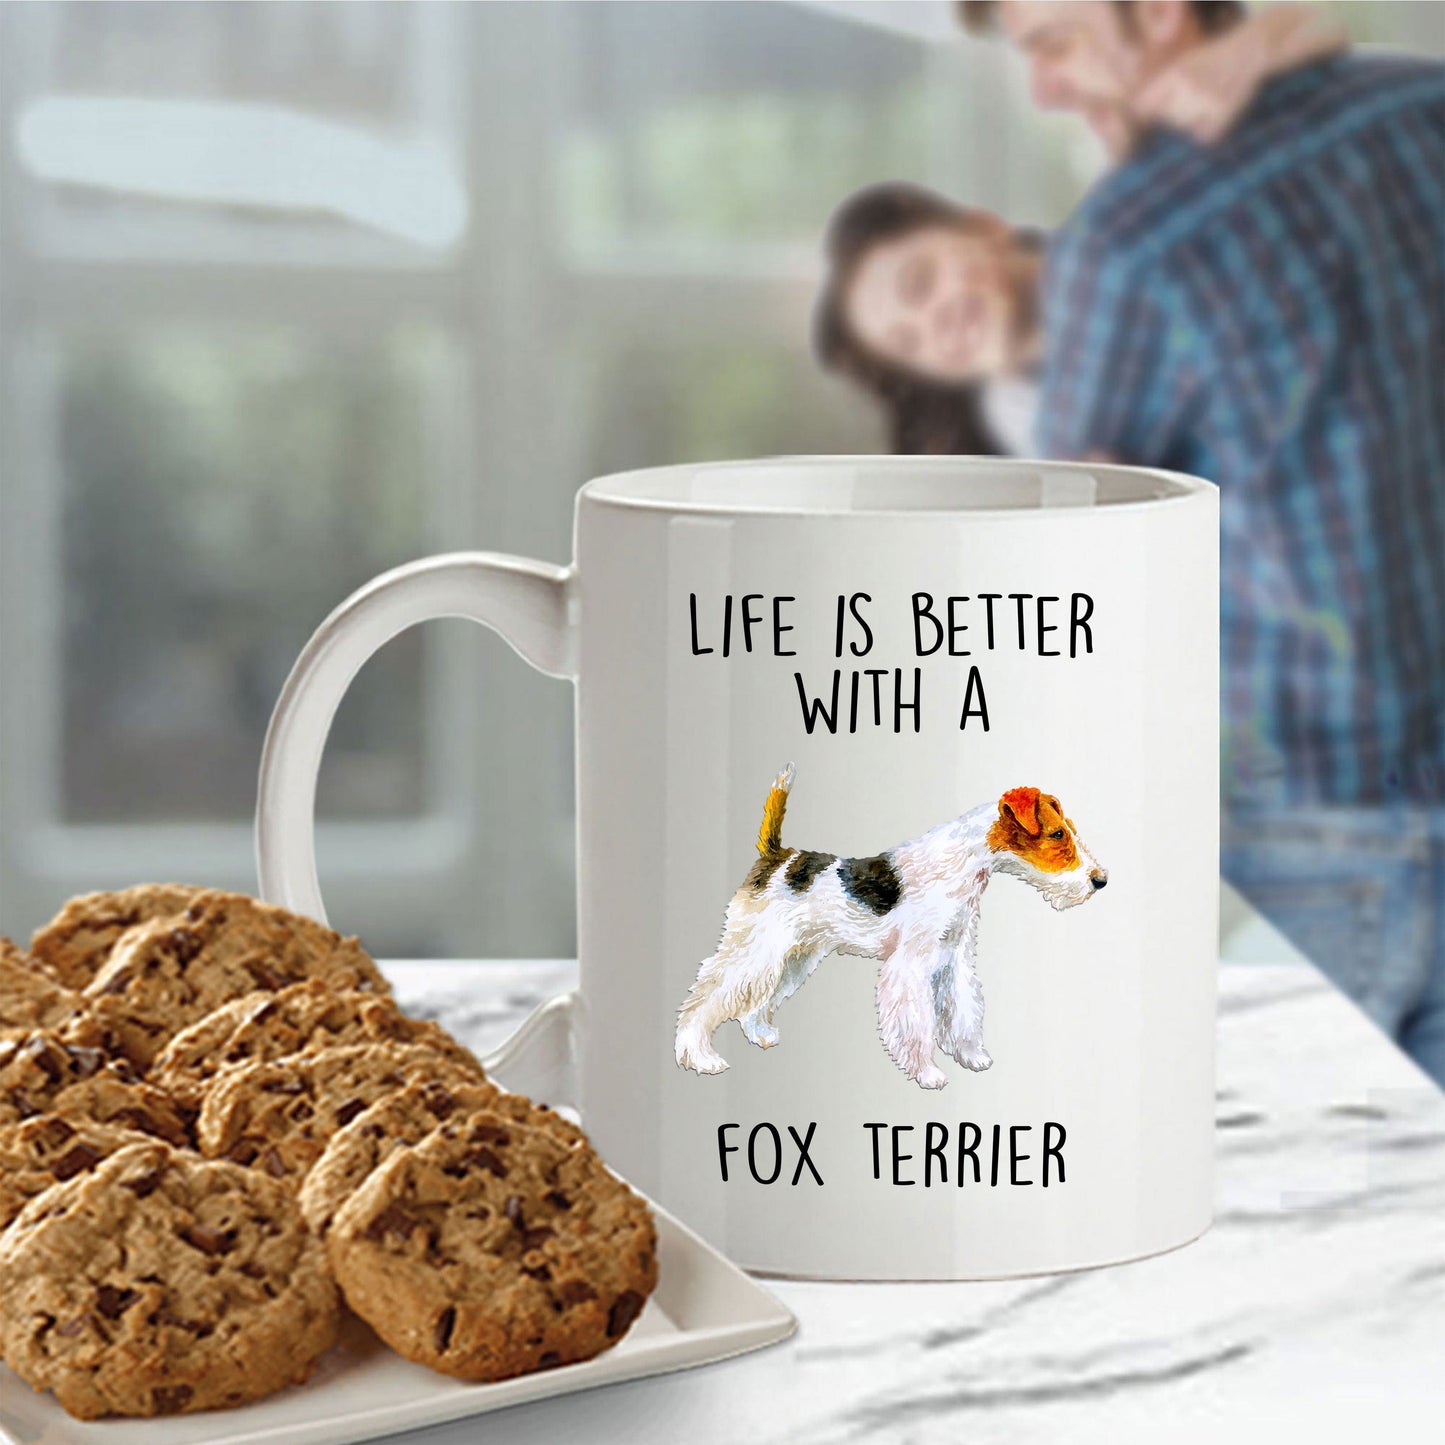 Life is Better with a Fox Terrier Dog Ceramic Coffee Mug